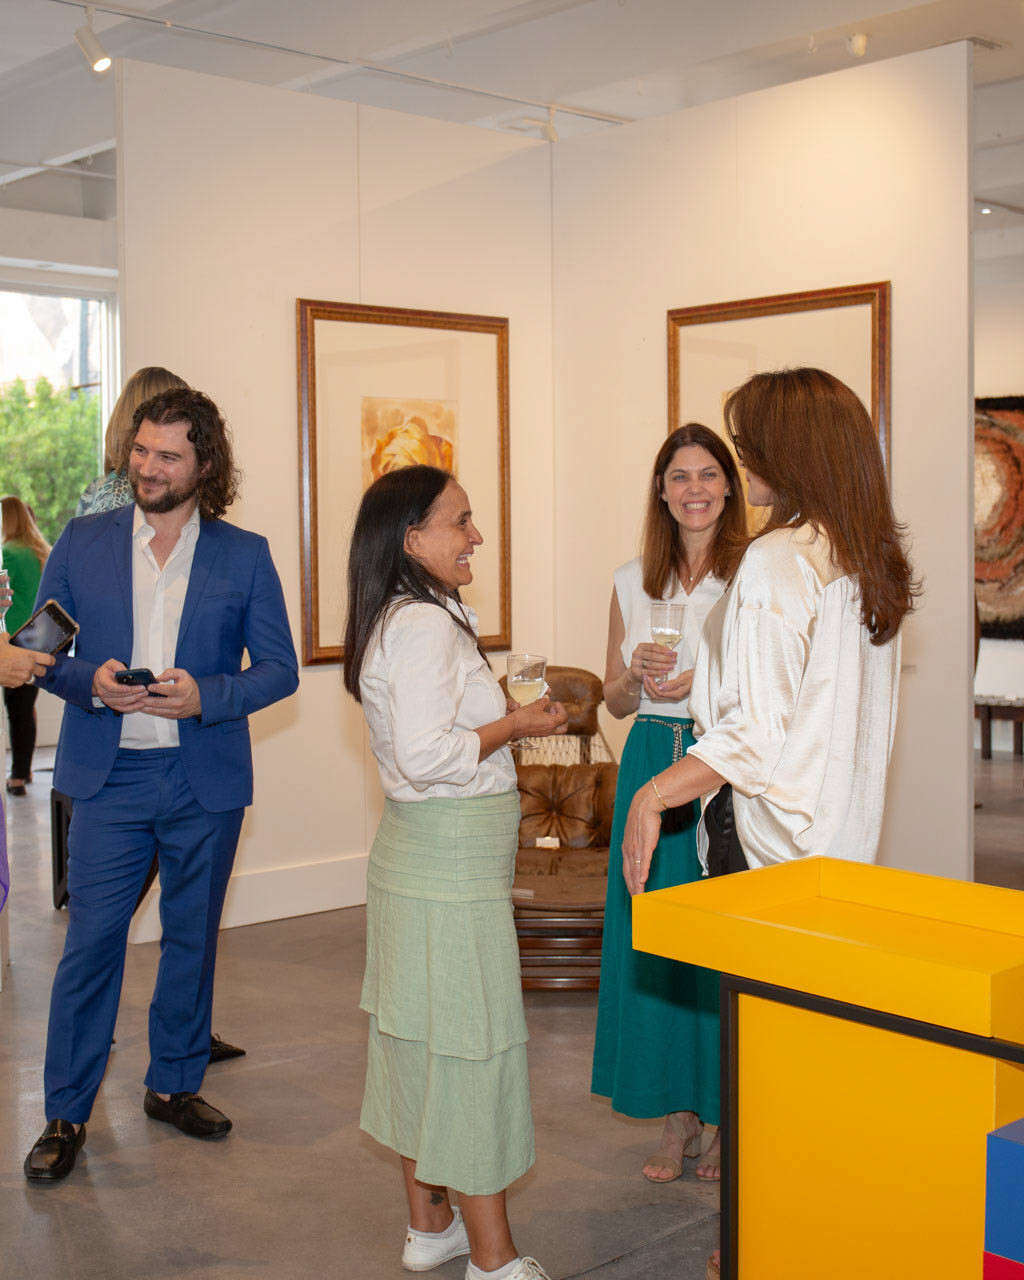 Artist Alex in a blue suit engaged in lively discussion with art collectors at a gallery exhibition, with paintings and sculptures in the background.